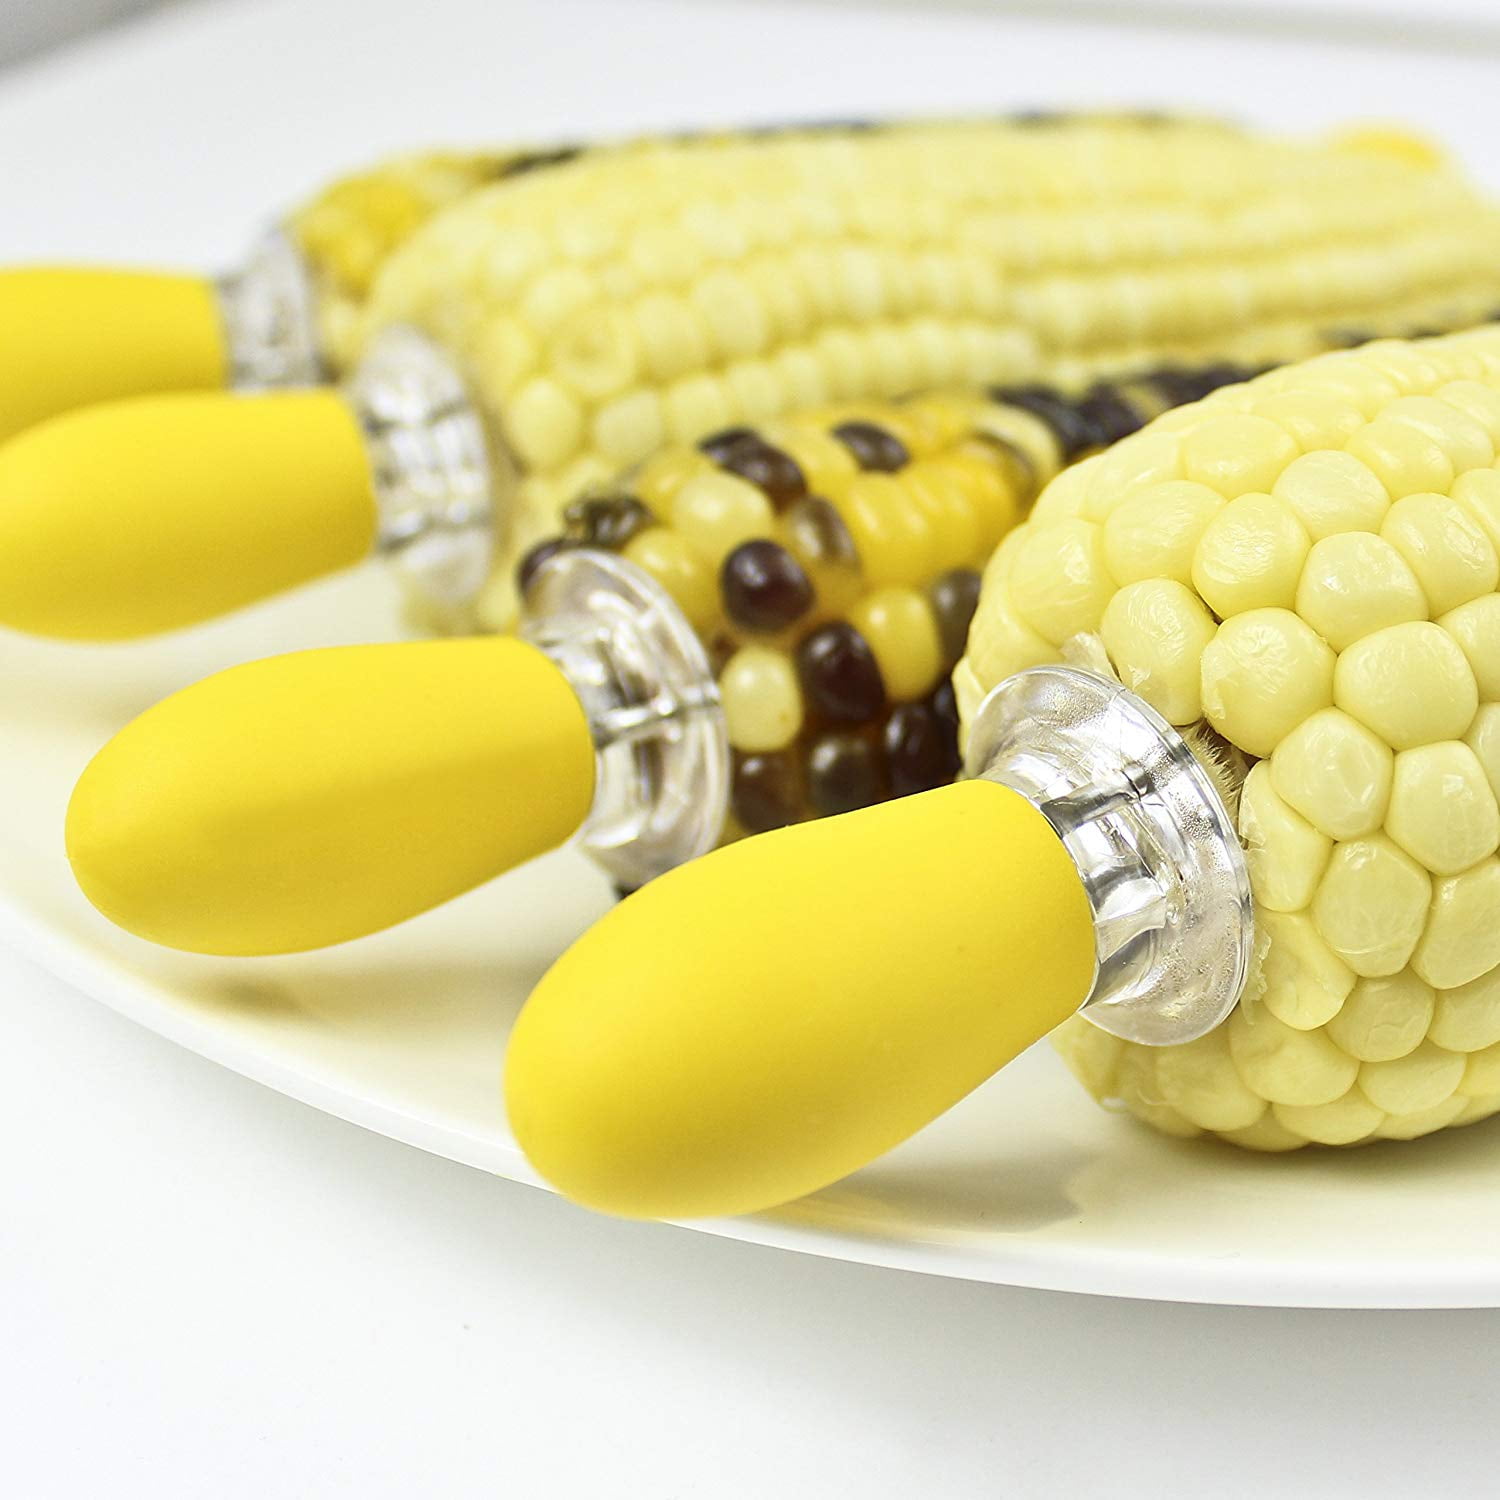 Details about / 6pcs Corn on the Cob Holders Skewer Needle Prong Fork Pick ...